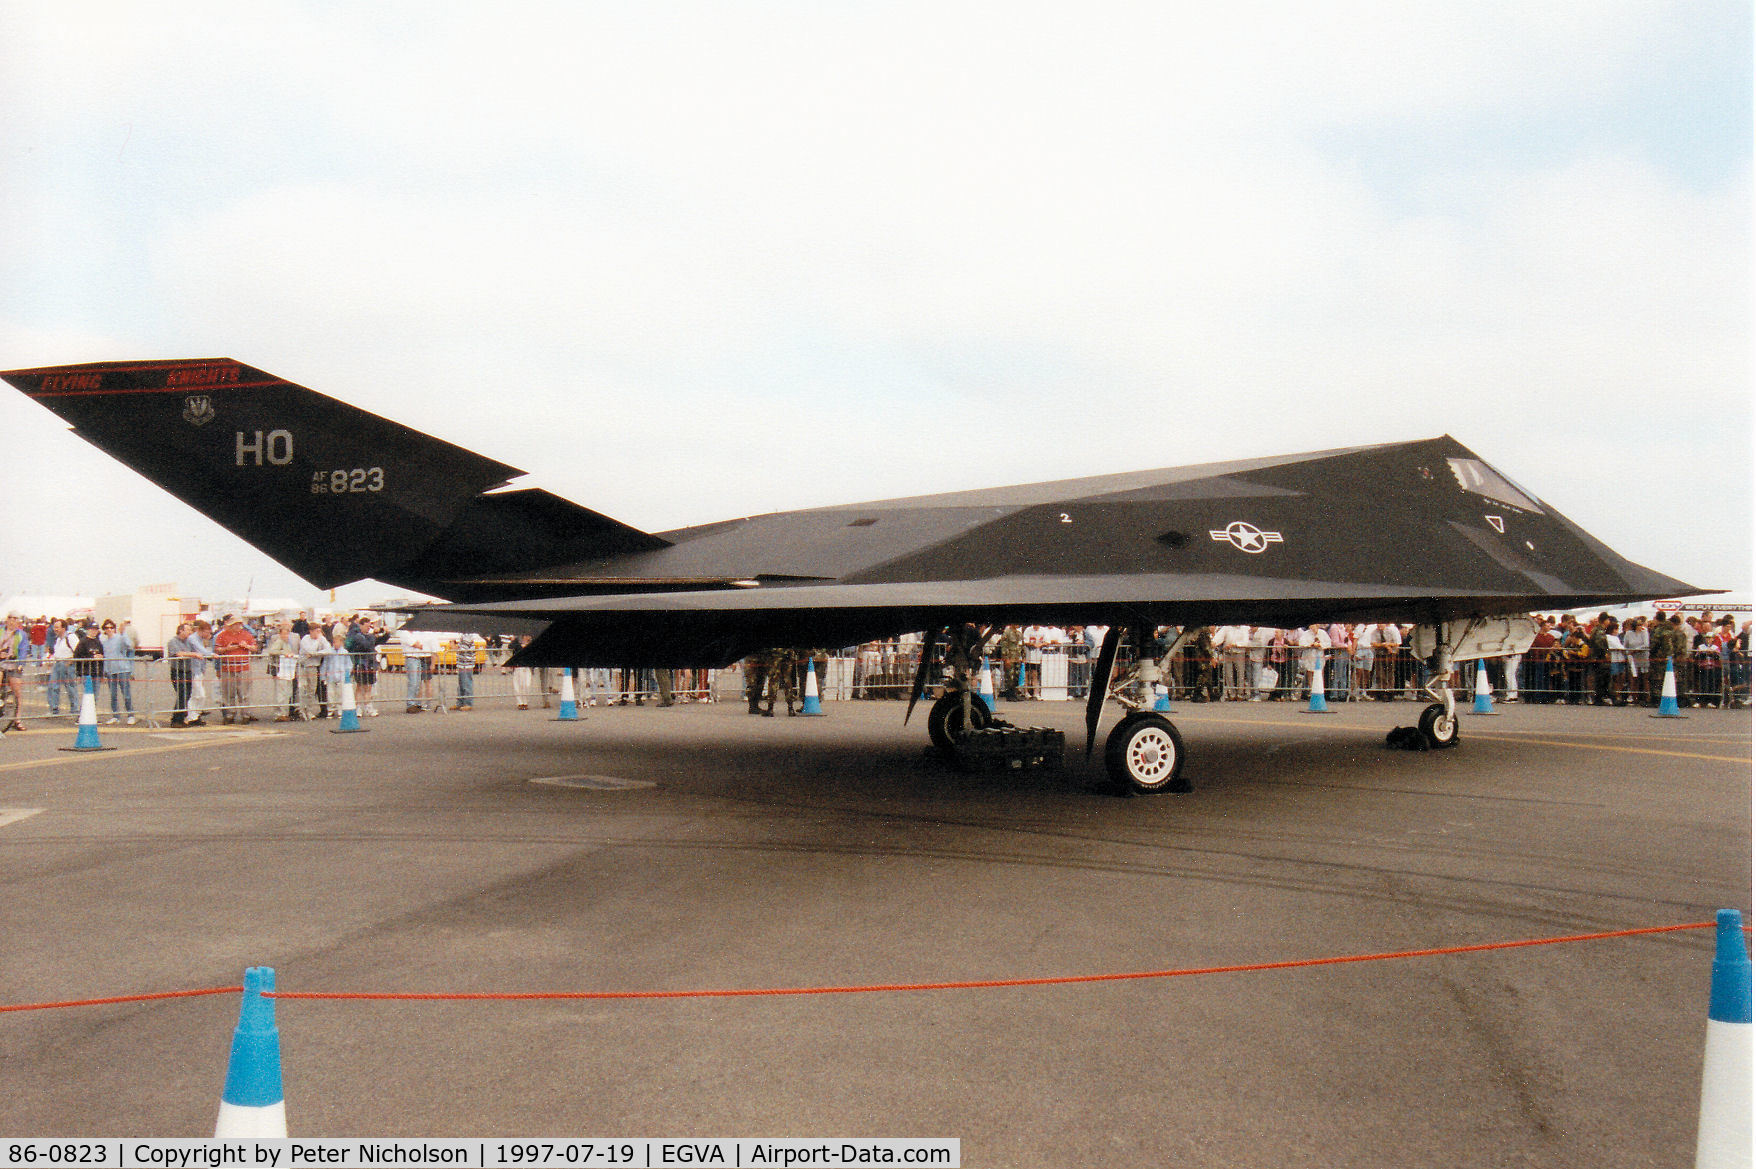 86-0823, 1986 Lockheed F-117A Nighthawk C/N A.4061, F-117A Nighthawk, callsign Trend 52, of 9th Fighter Squadron/49th Fighter Wing at Holloman AFB on display at the 1997 Intnl Air Tattoo at RAF Fairford.